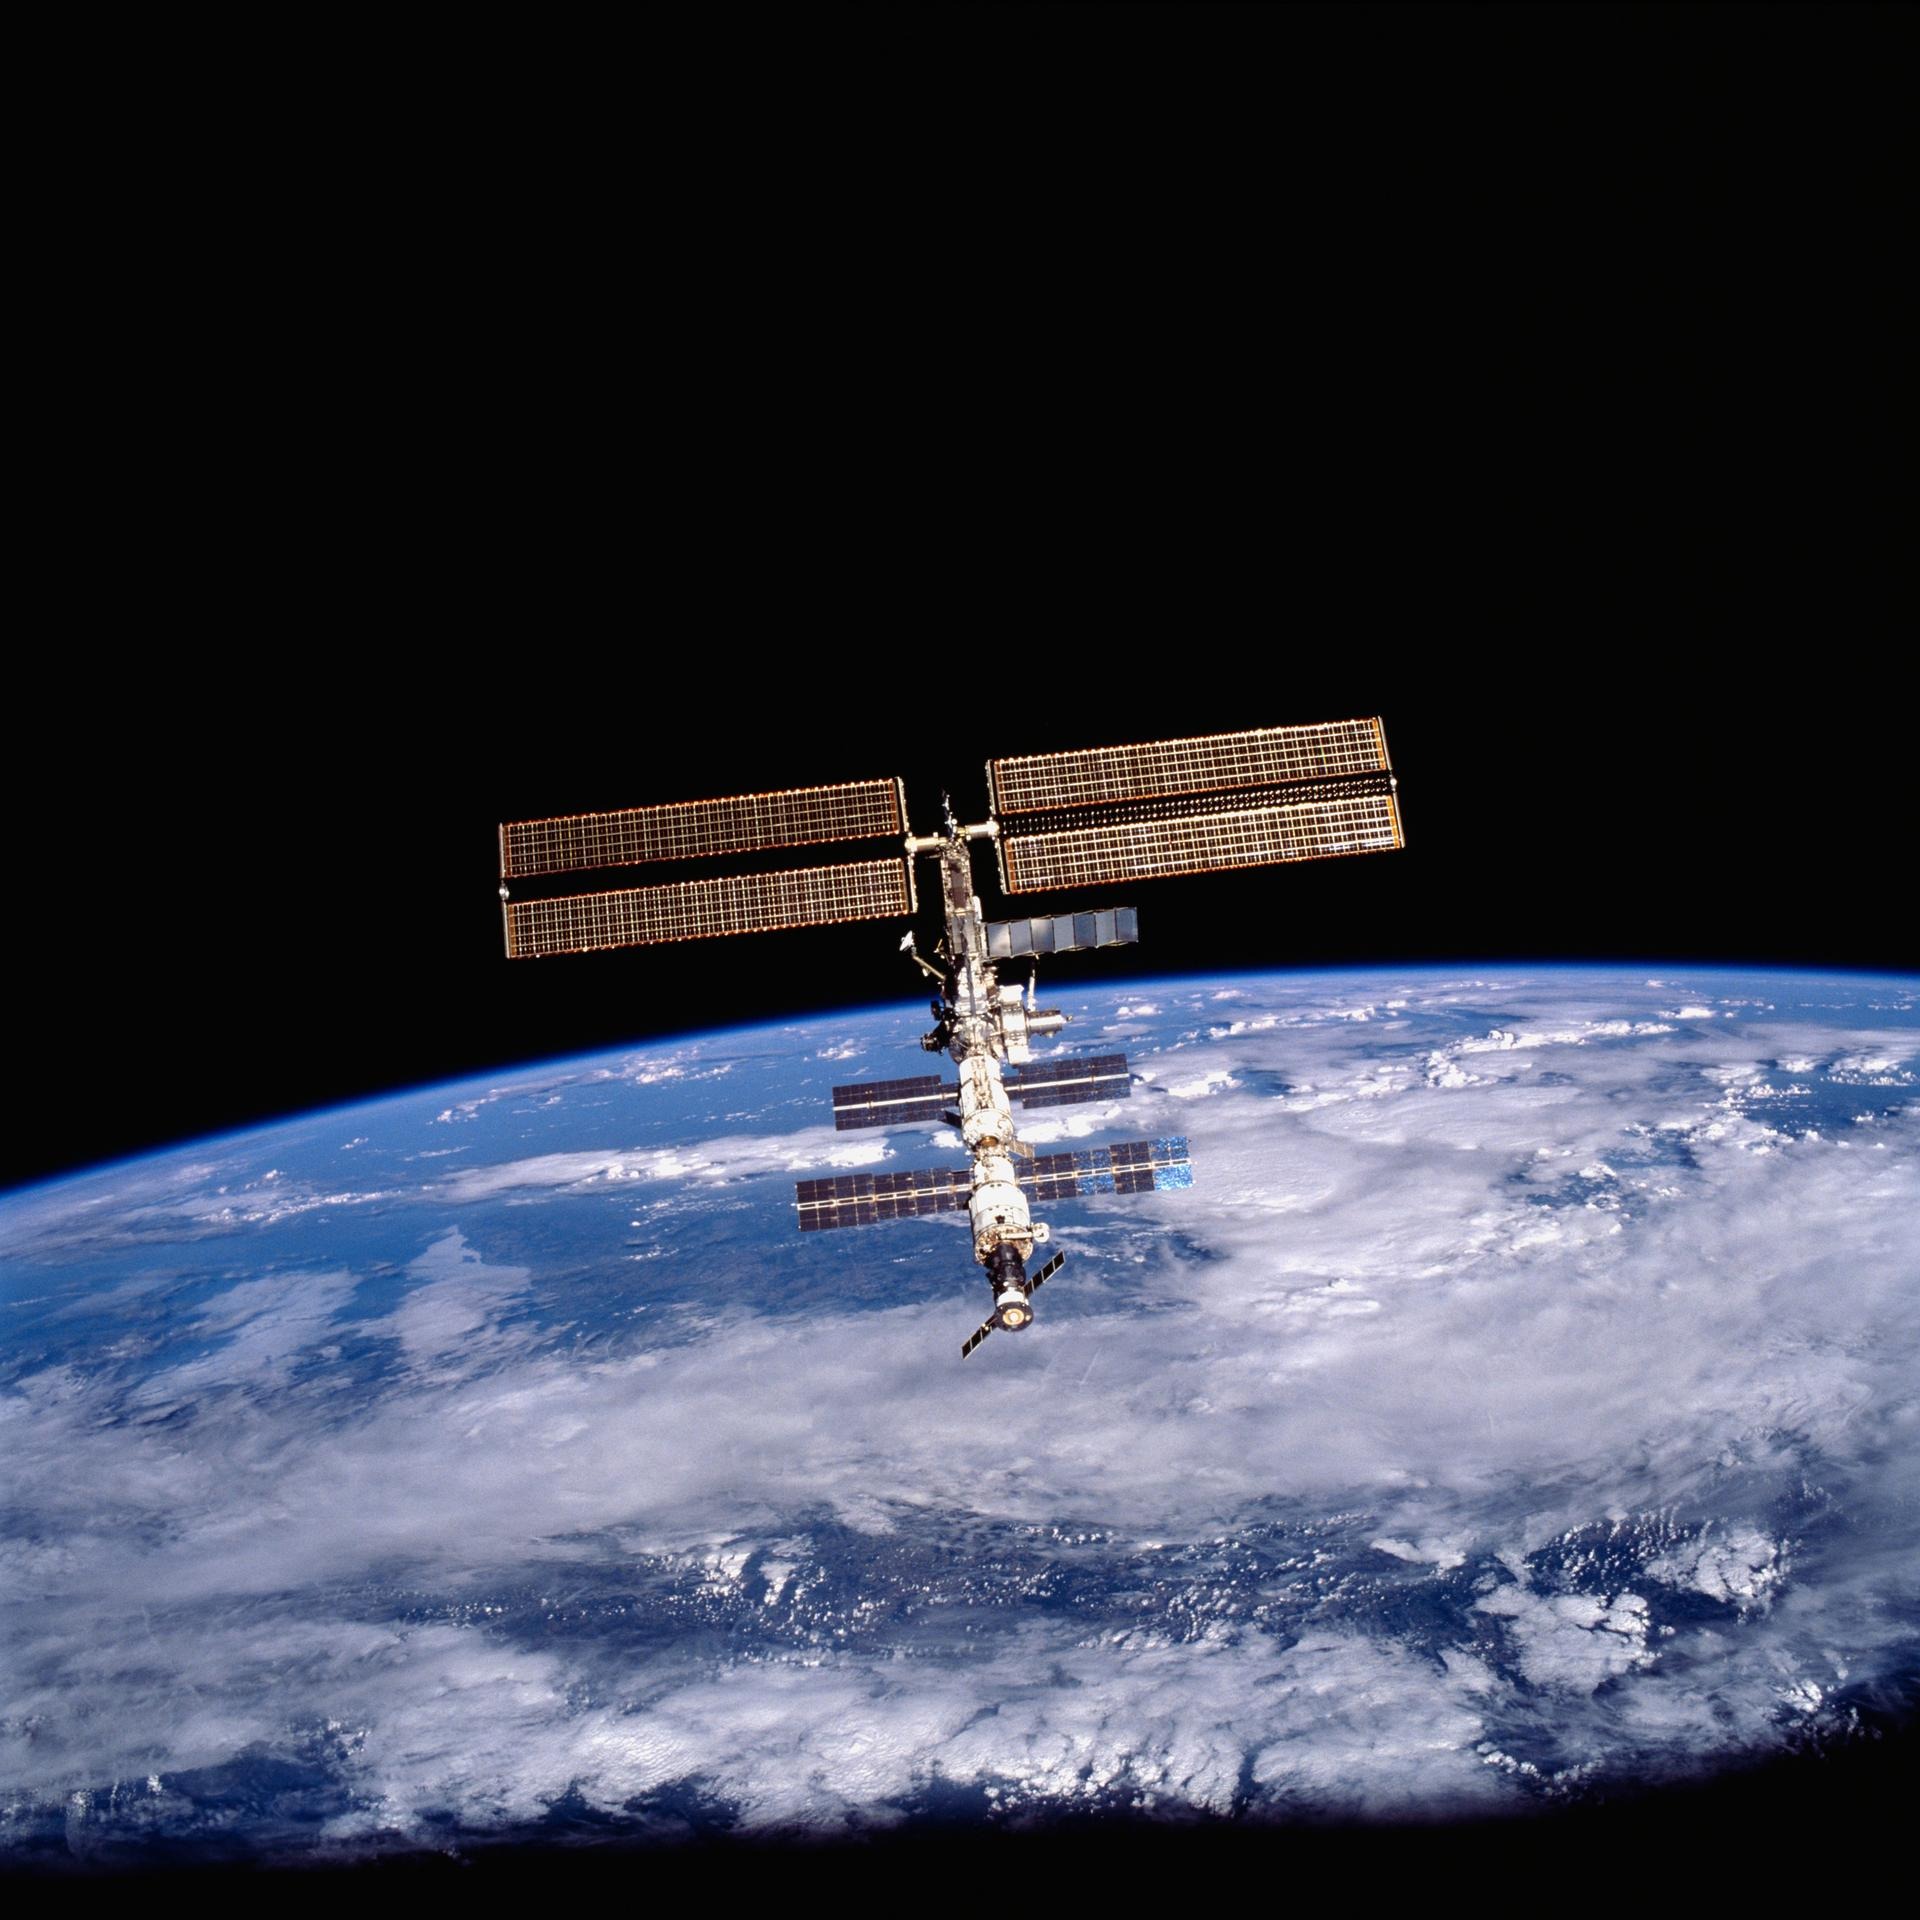 The International Space Station (ISS) in 2001, shown in orbit over Earth.